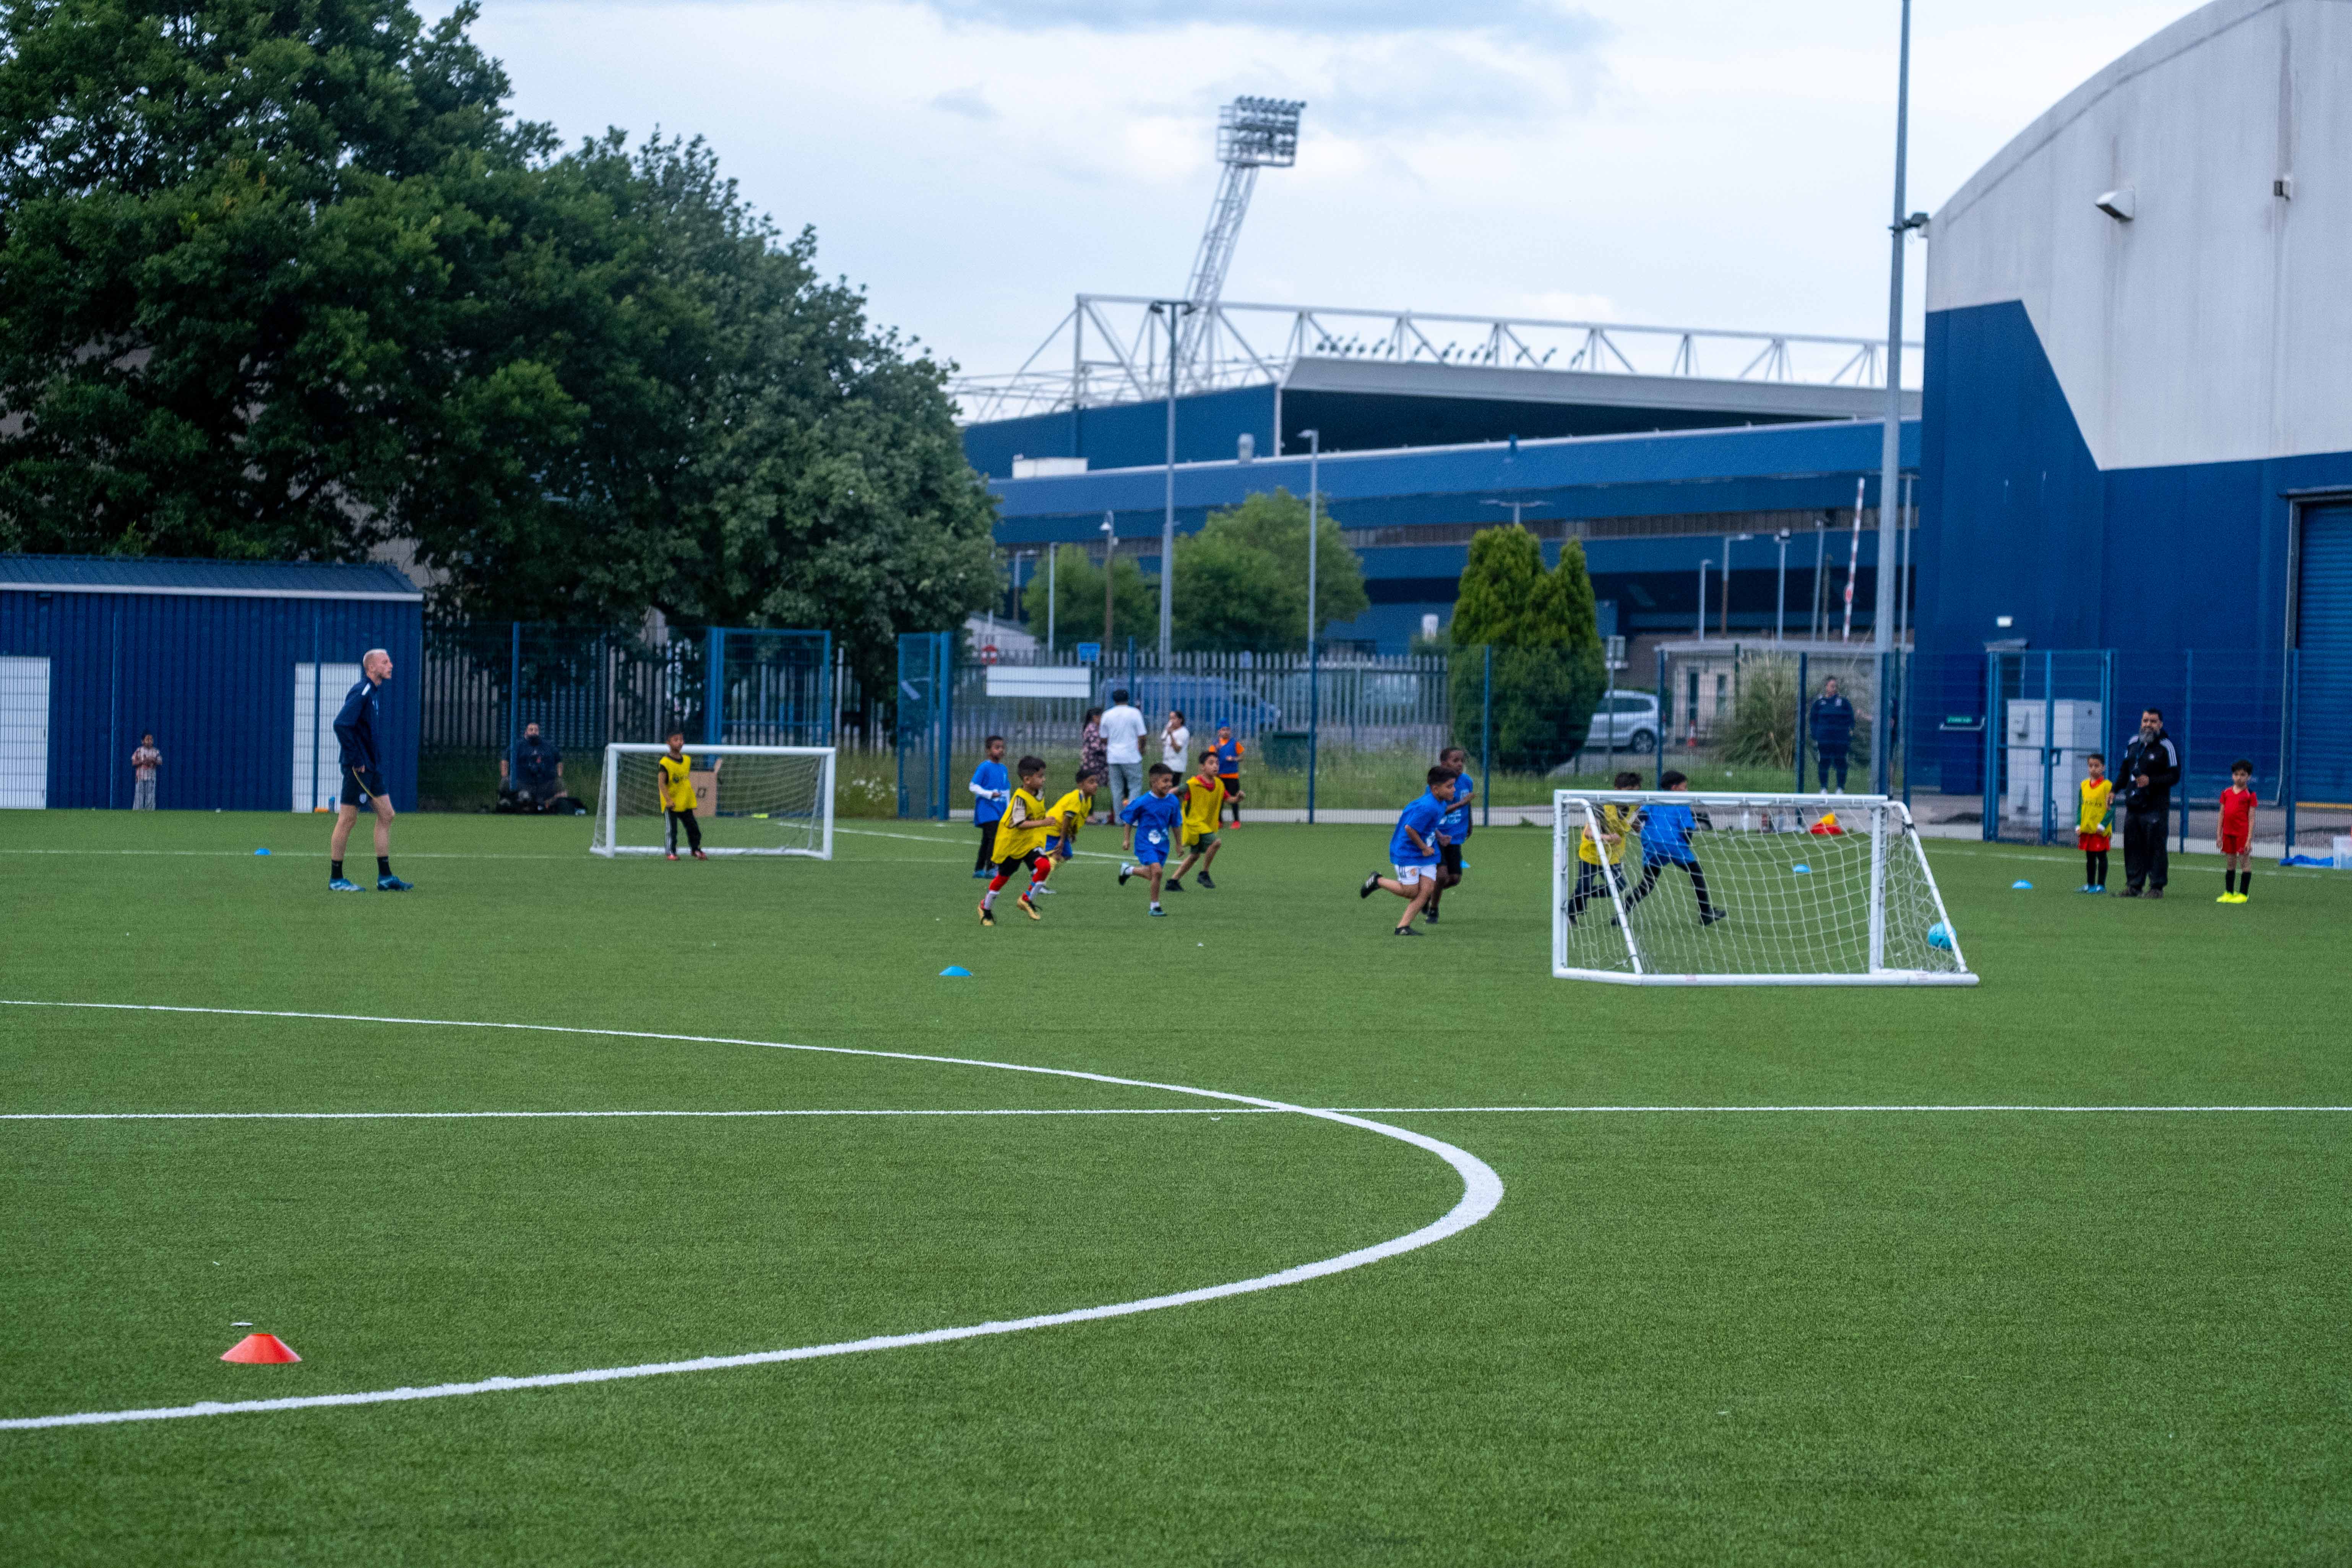 Players enjoy their match at the South Asian Emerging Talent Festival with the backdrop of The Hawthorns.